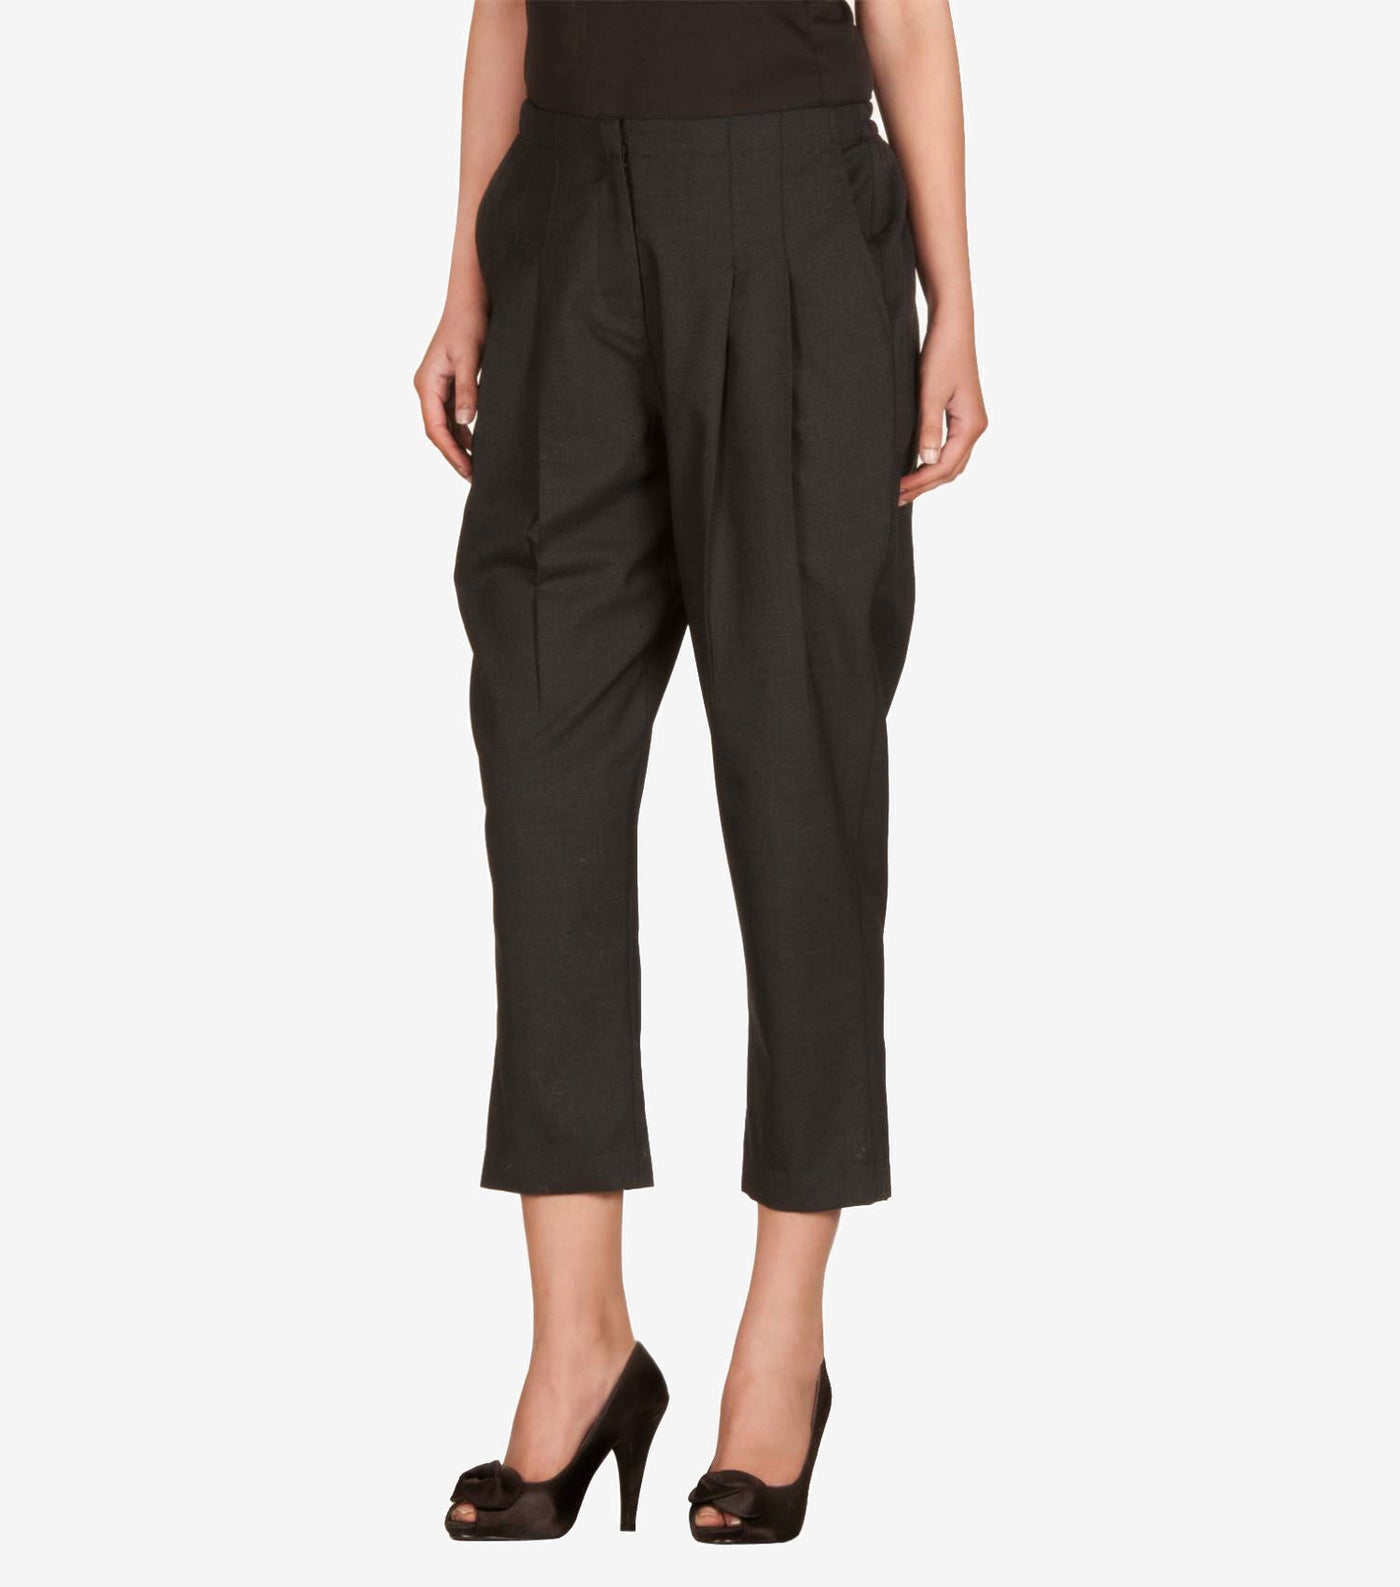 Wool Trousers – special offers for Women at Boozt.com